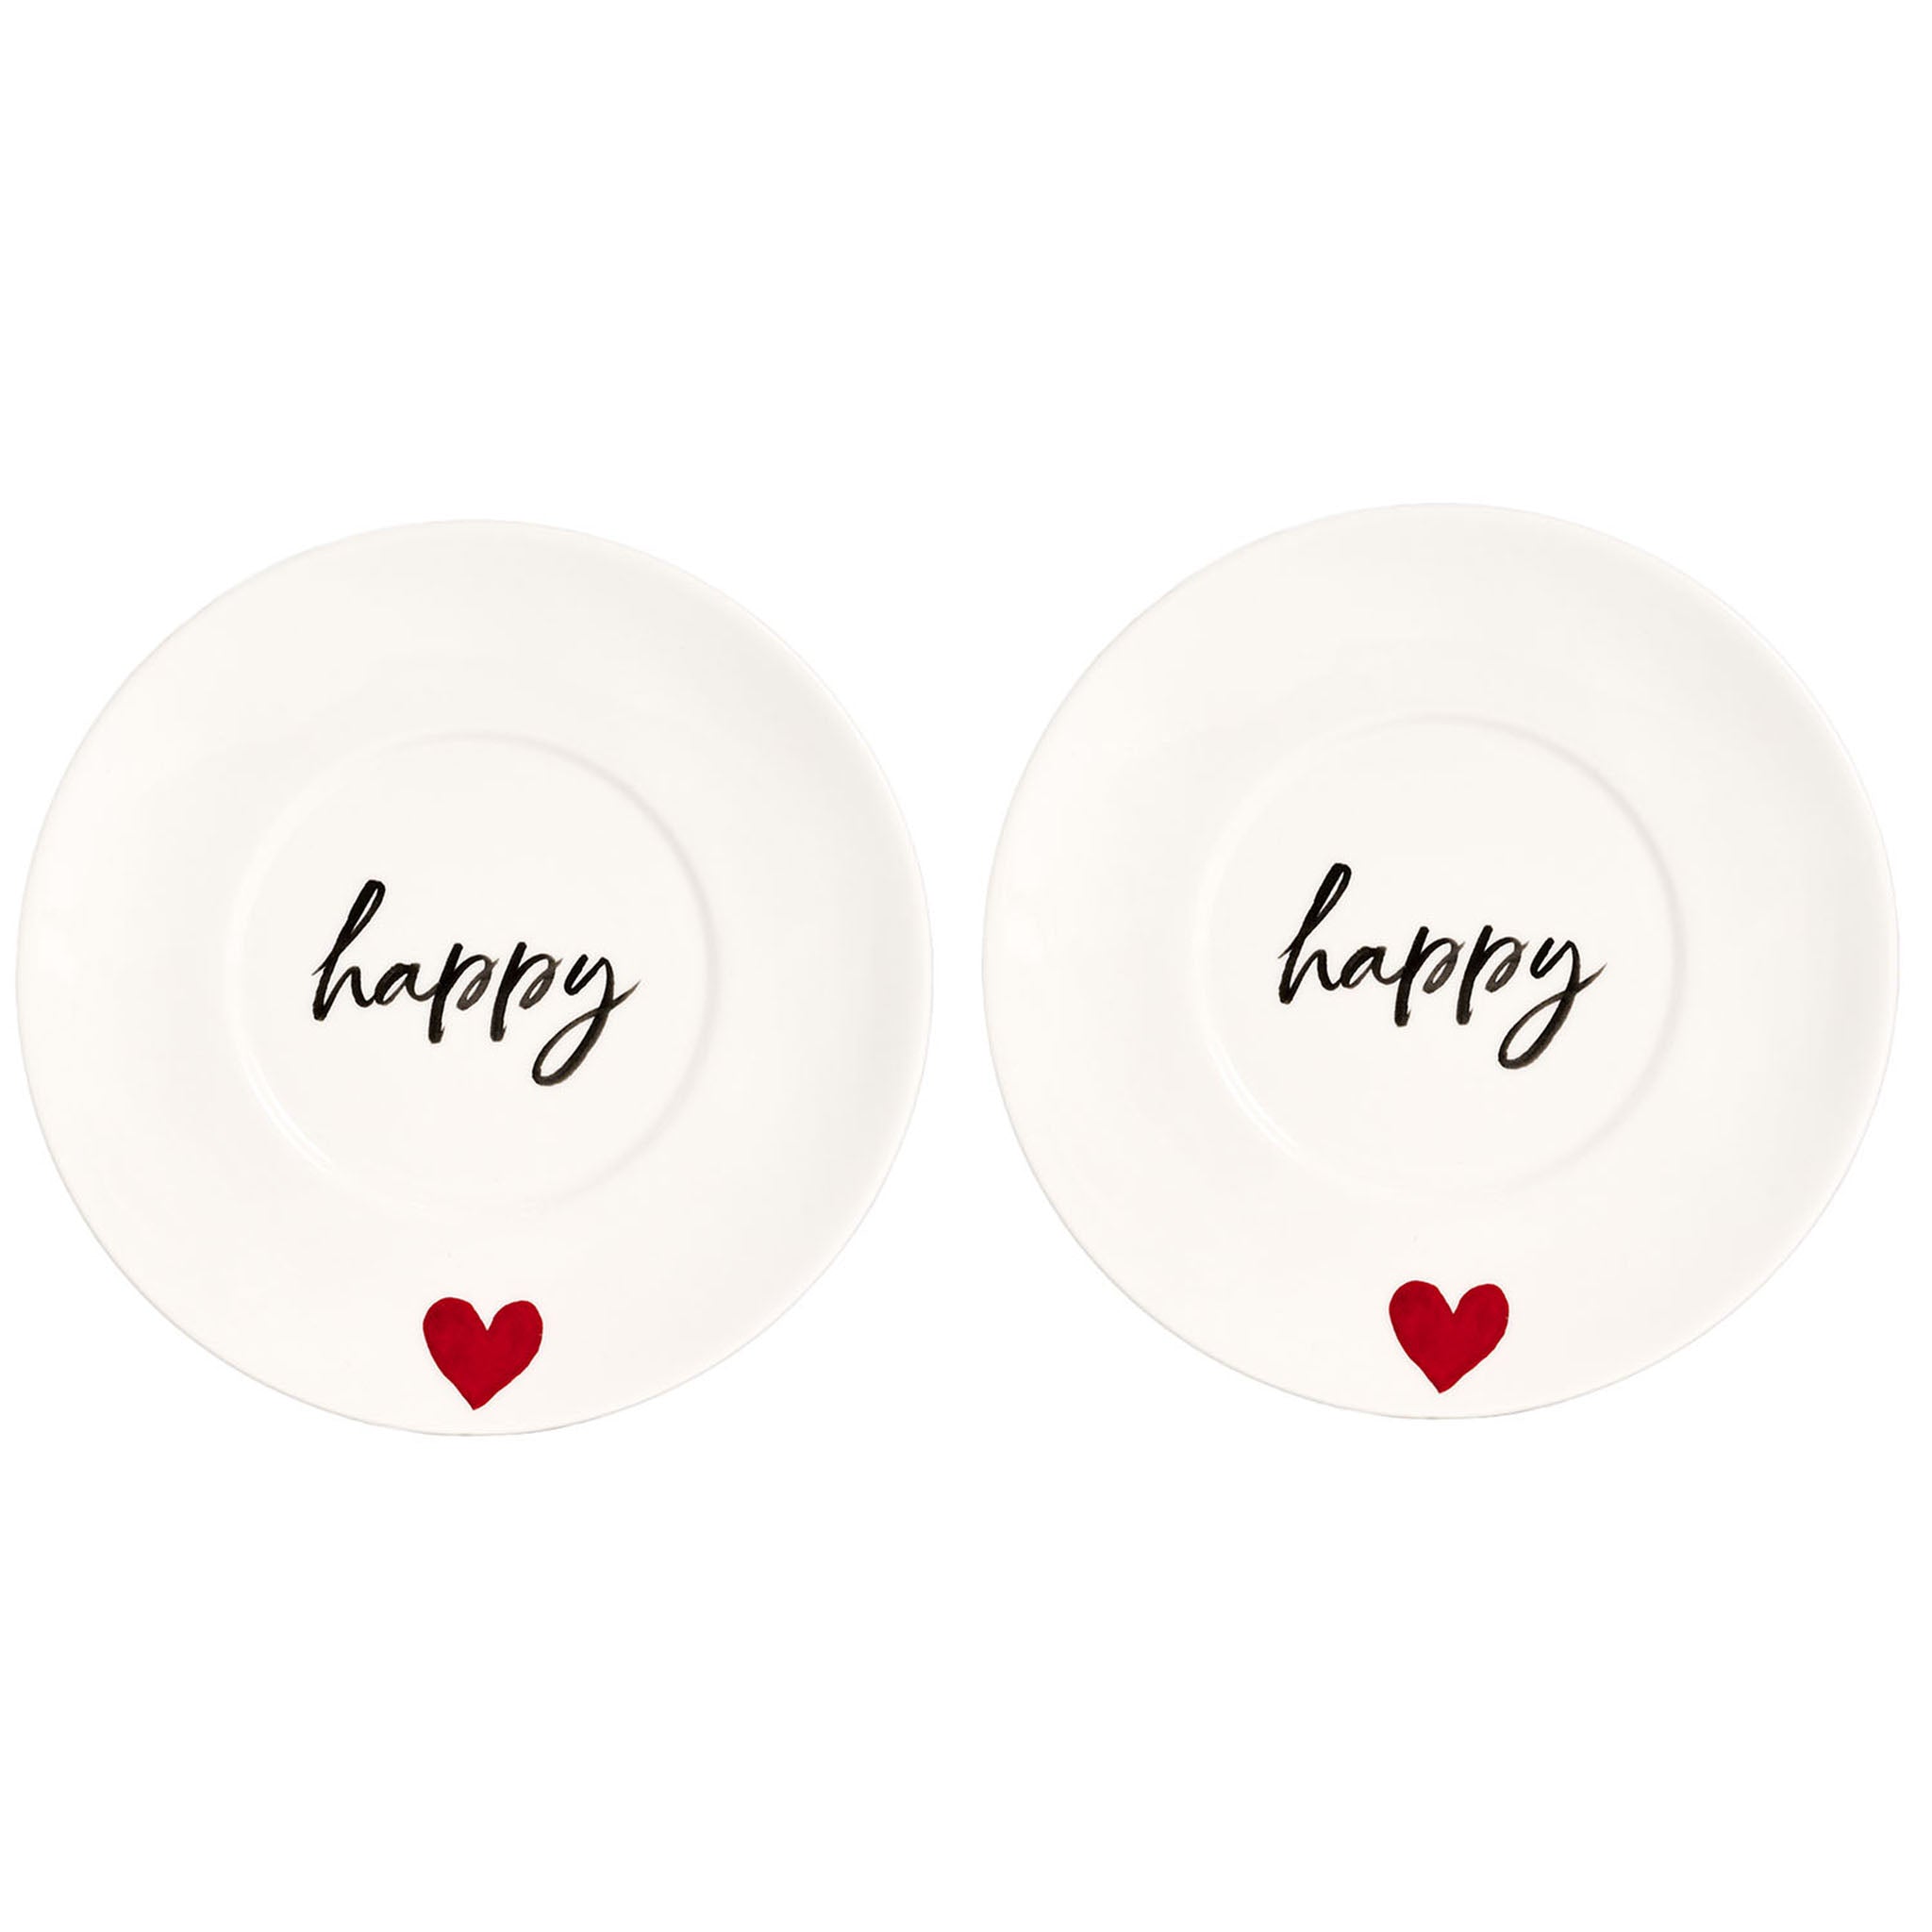 Happy breakfast cup plates - Set of 2